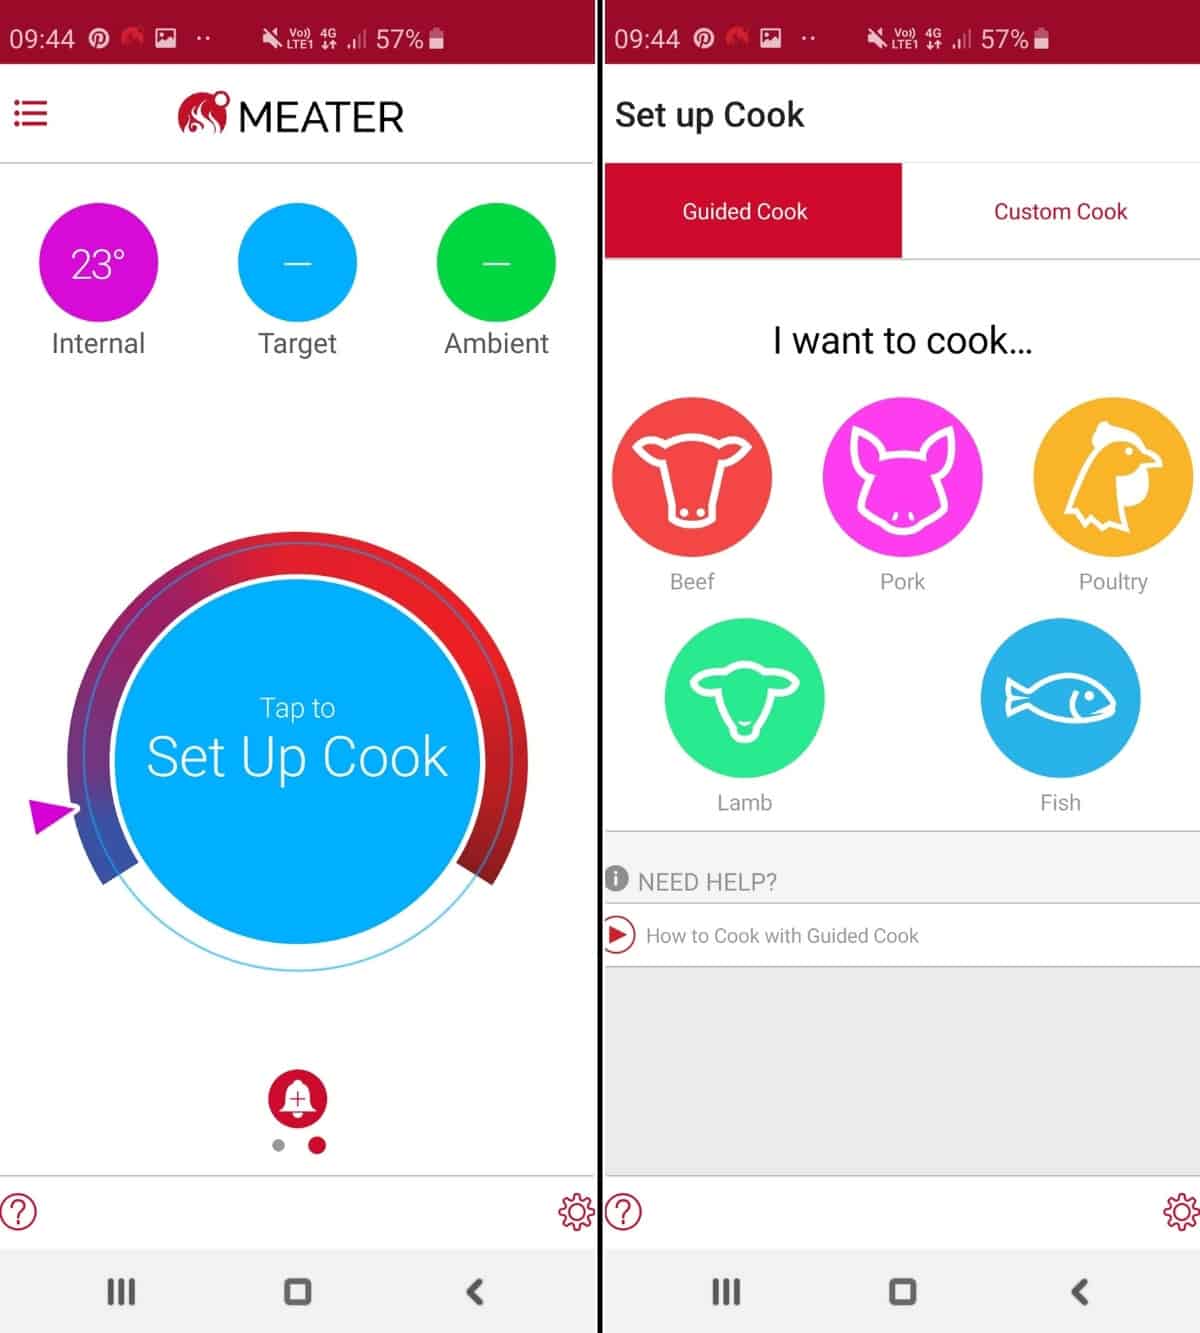 Meater app screenshots showing how to set up a guided cook.